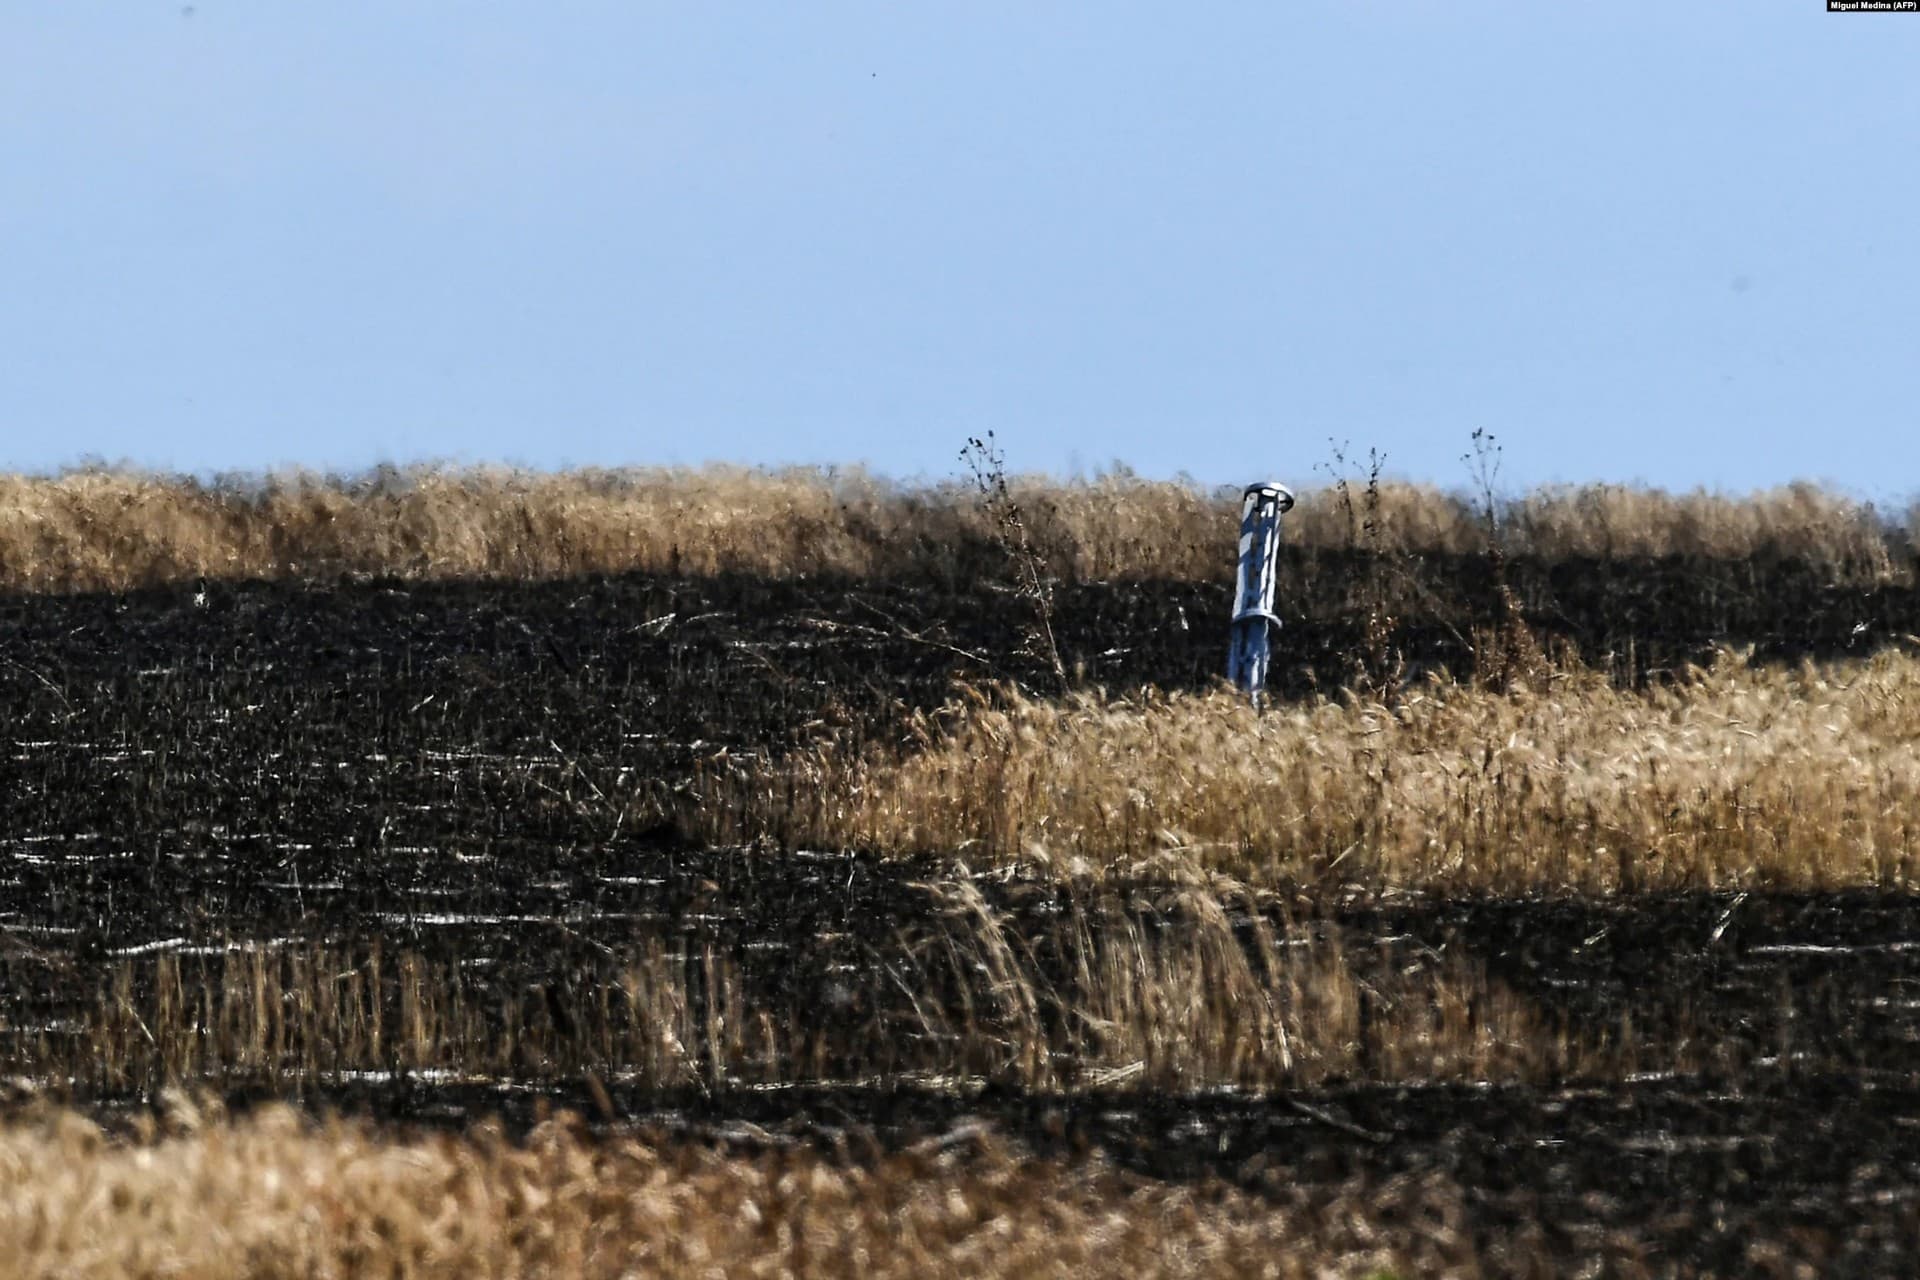 The internal section of a rocket embedded in a singed wheat field at an undisclosed location in Ukraine